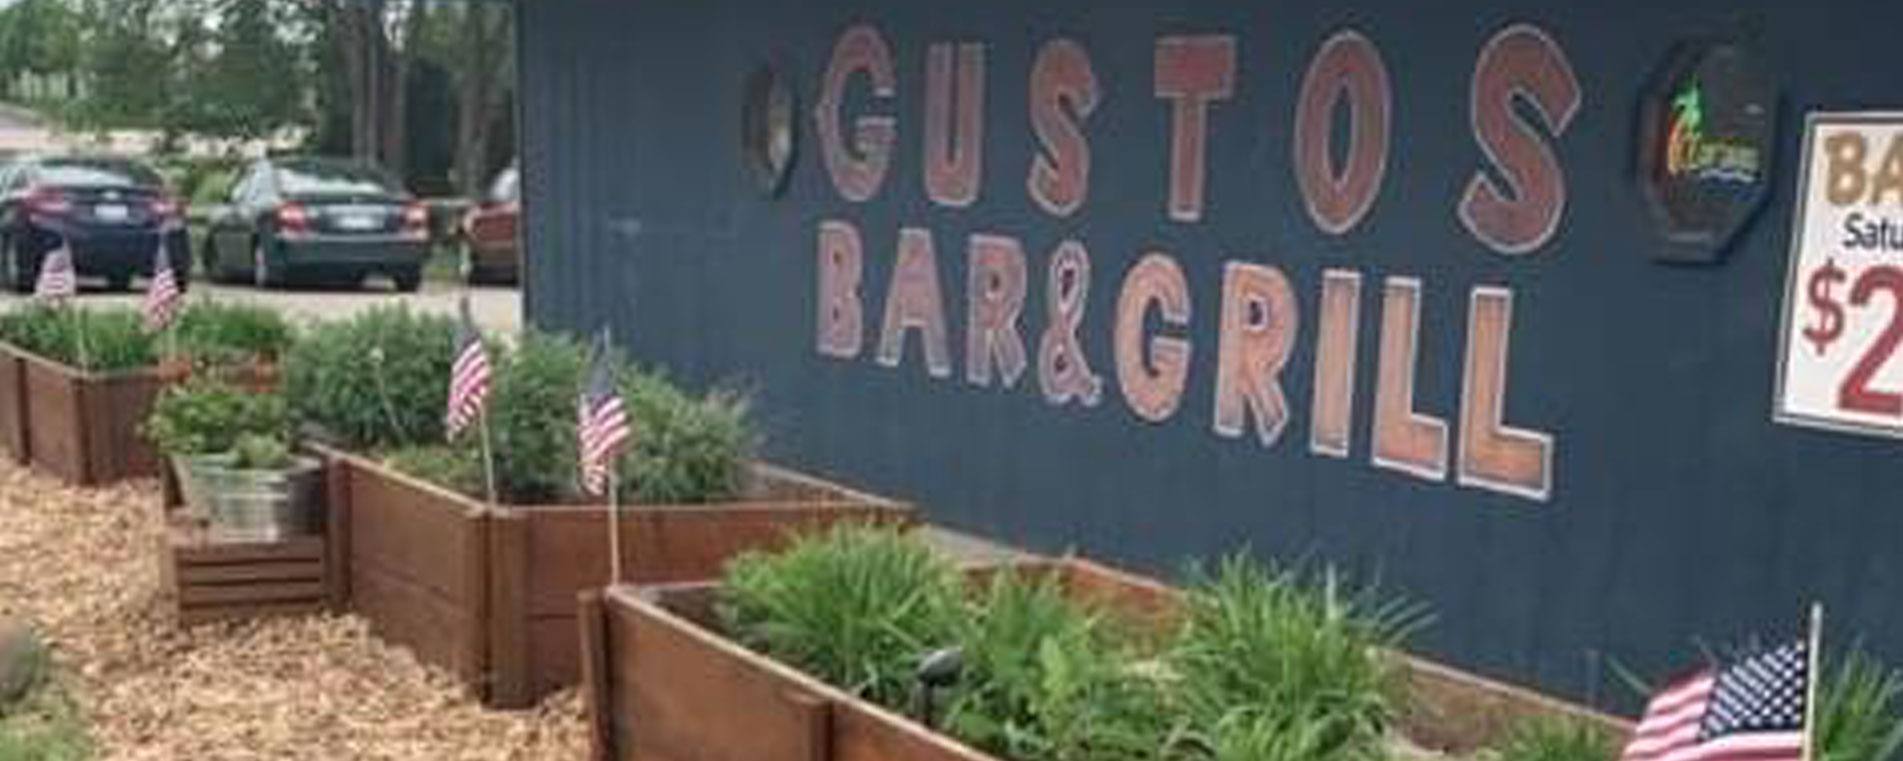 AB Gusto’s Bar & Grill